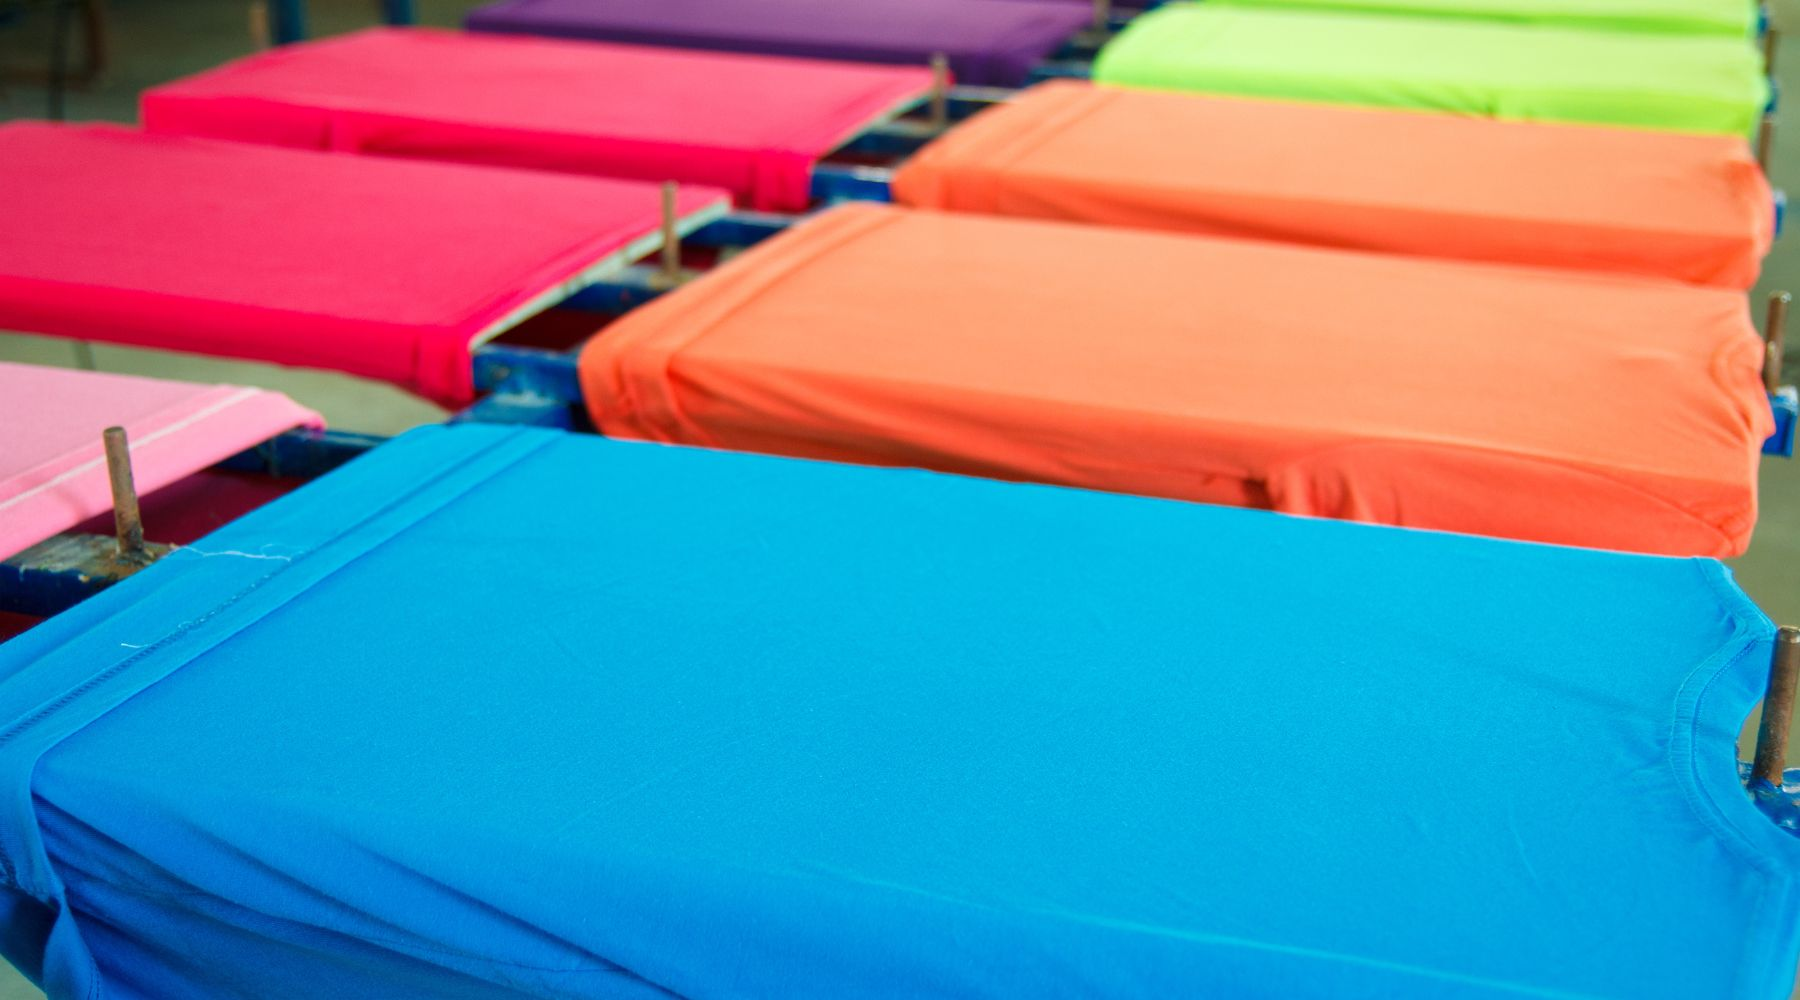 Blue fabric in focus among rows of vibrant orange, pink, and lime fabrics on display.